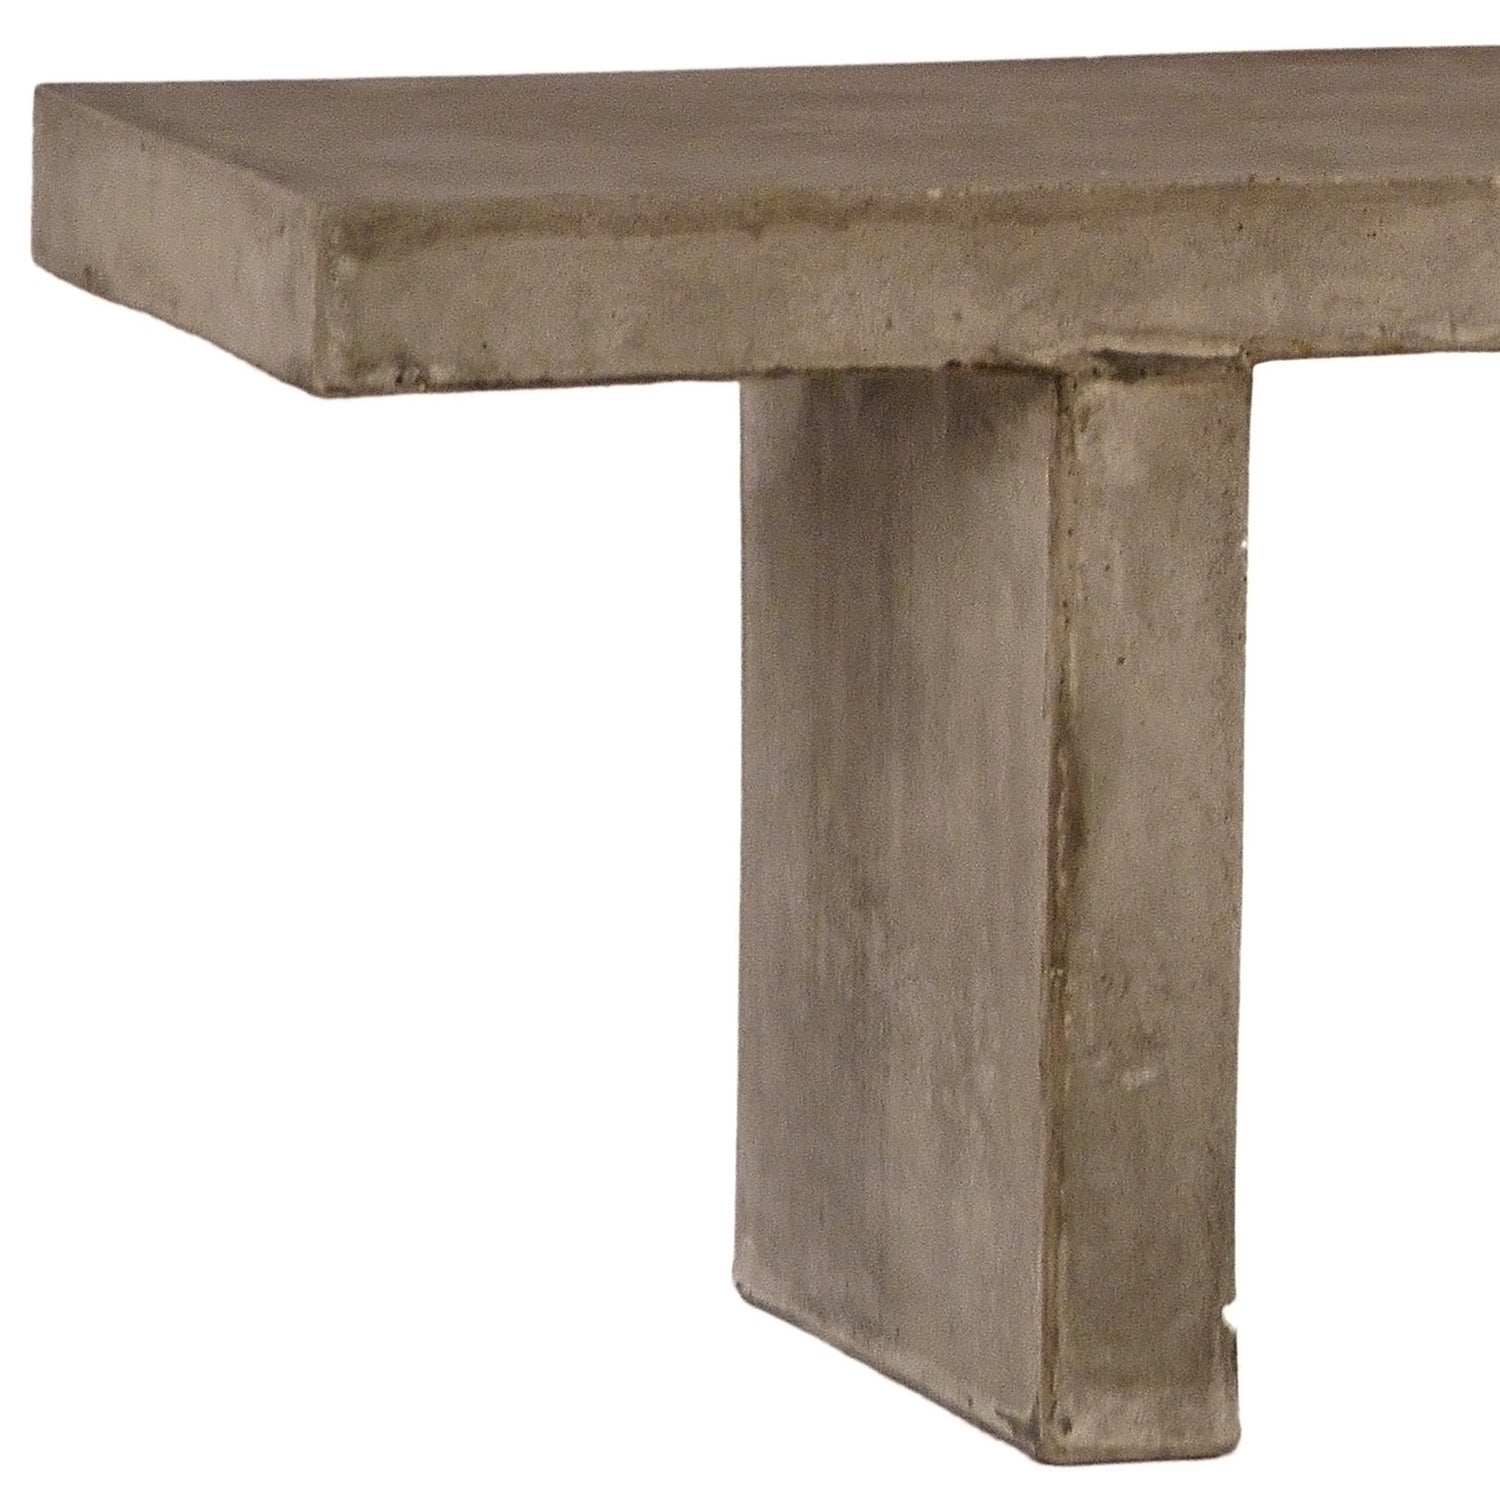  Our Santino Bench is made with a durable fiber reinforced concrete, finished with a dark grey concrete finish and sealed and treated for both indoor and outdoor use. Enjoy the classic look and strength of the Santino Bench for many years to come. Amethyst Home provides interior design, new home construction design consulting, vintage area rugs, and lighting in the Winter Garden metro area.